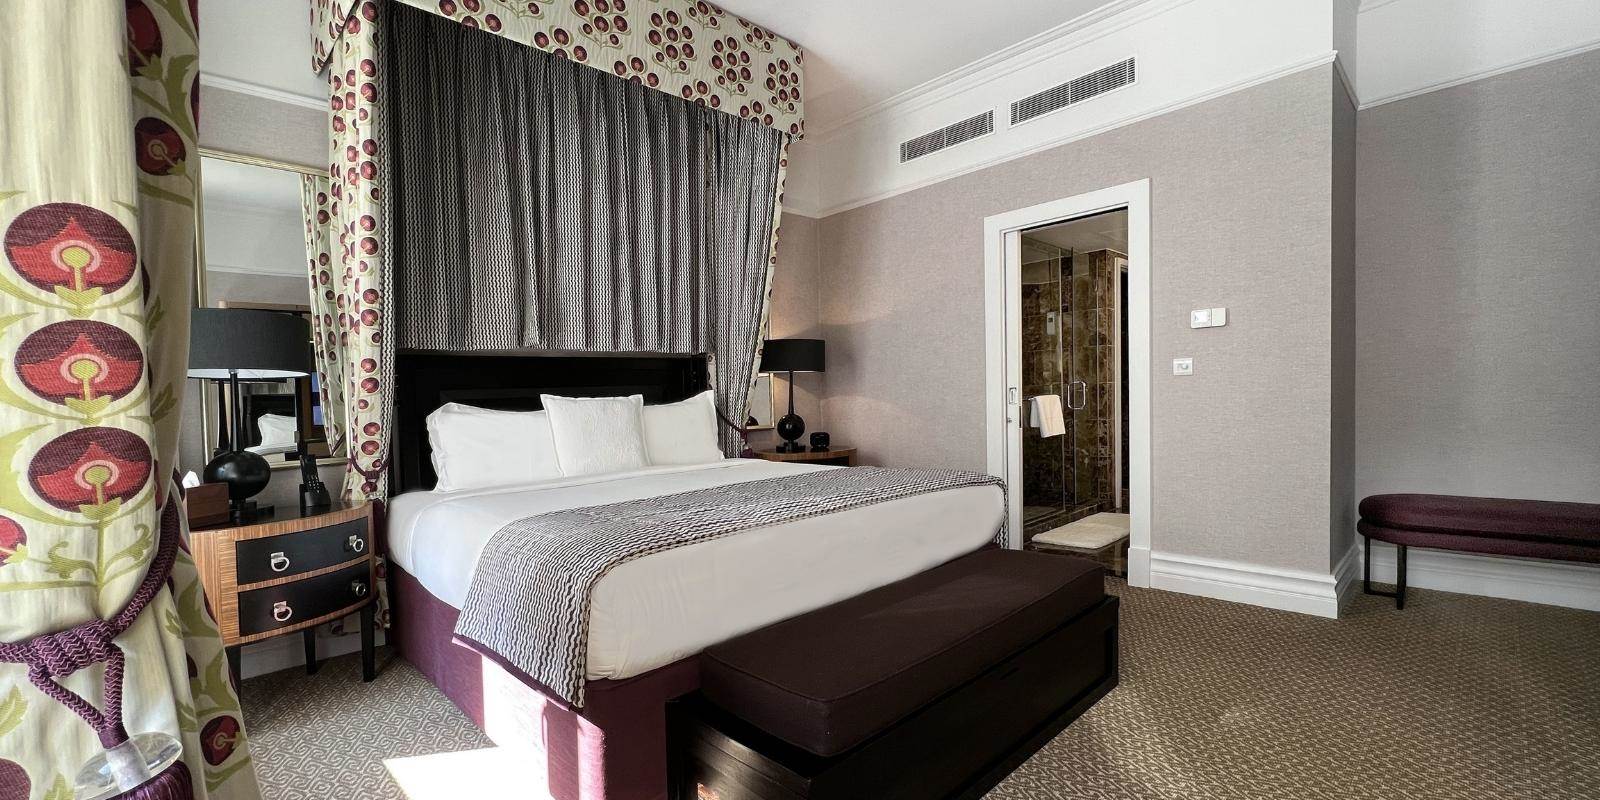 St. Ermins luxury suite in central London